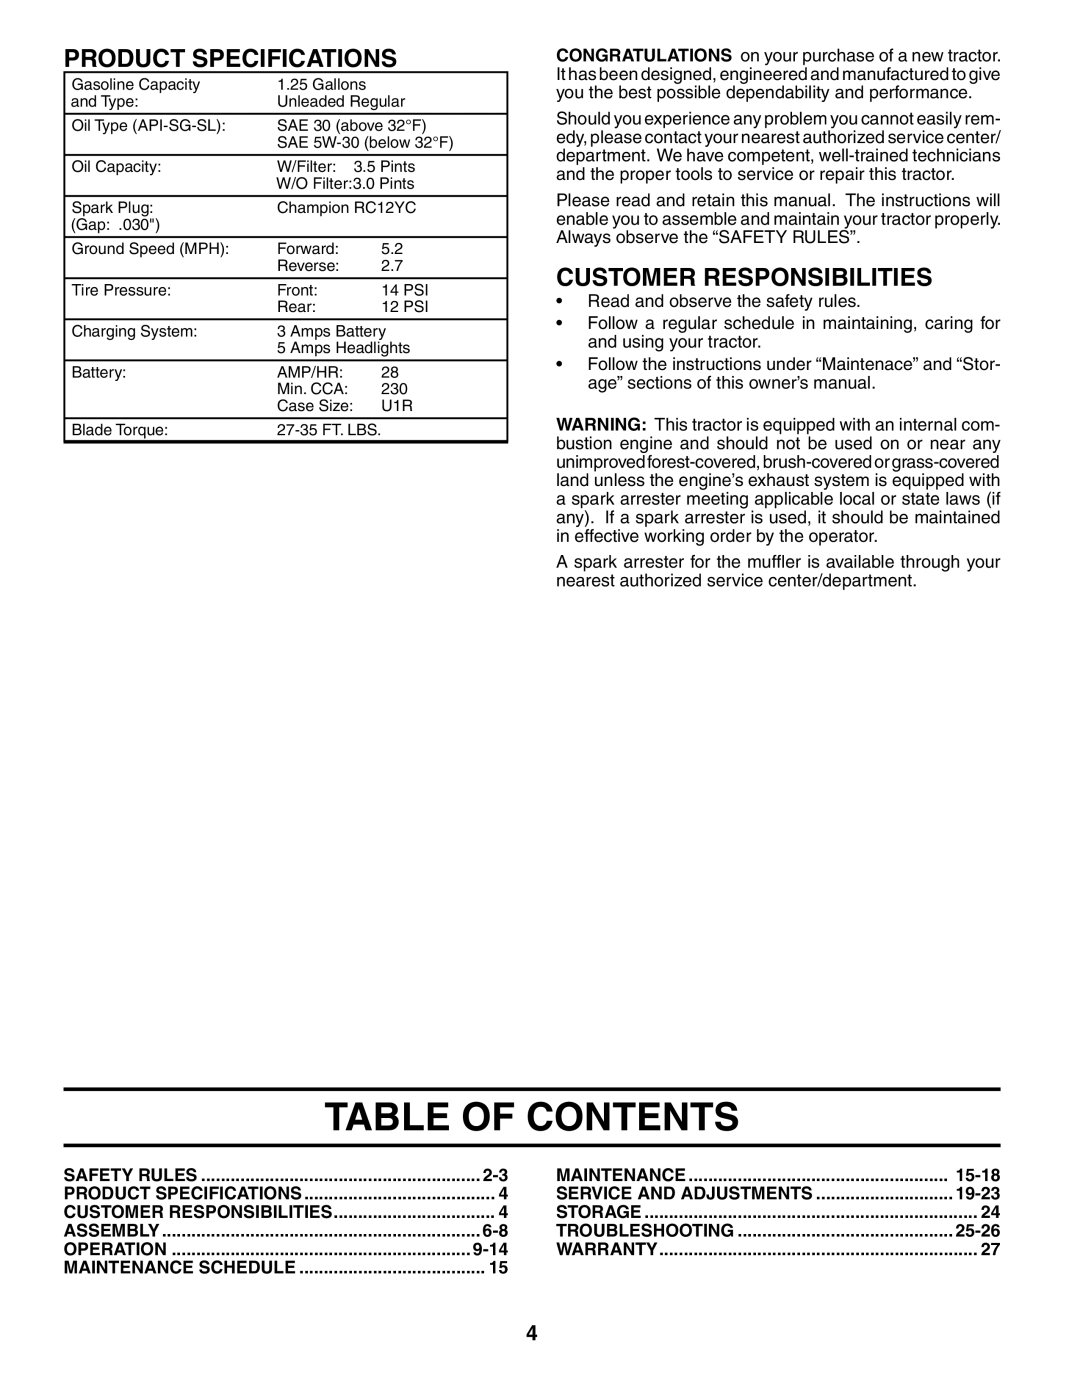 Poulan 197022 manual Table of Contents 